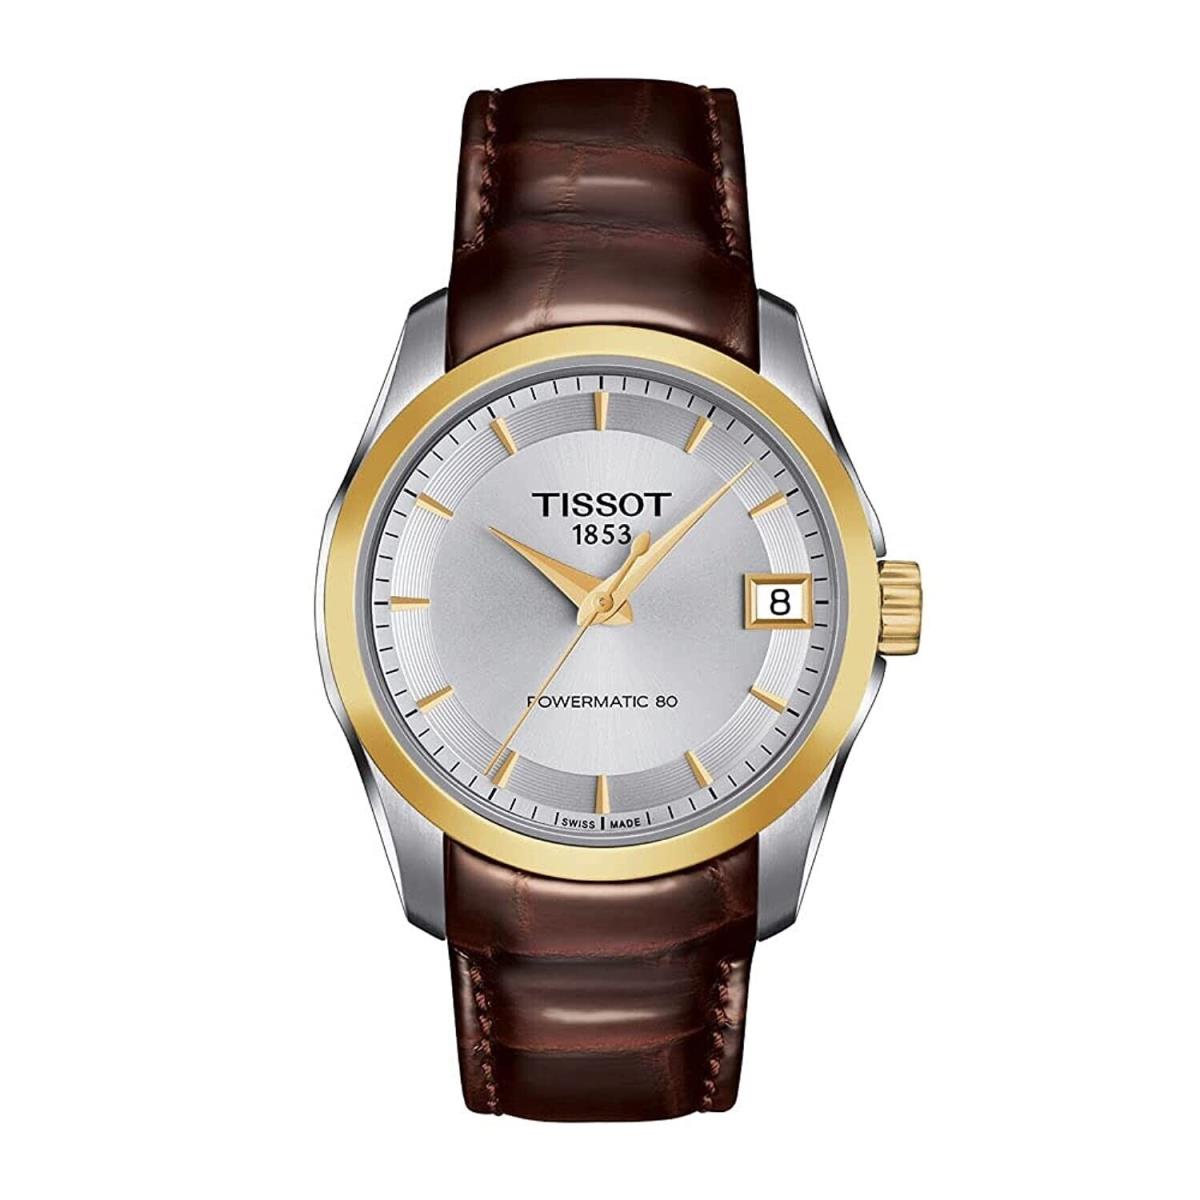 Tissot Ladies Couturier Powermatic 80 Silver Dial Watch - T0352072603100 - Dial: Silver, Band: Brown, Bezel: Gold